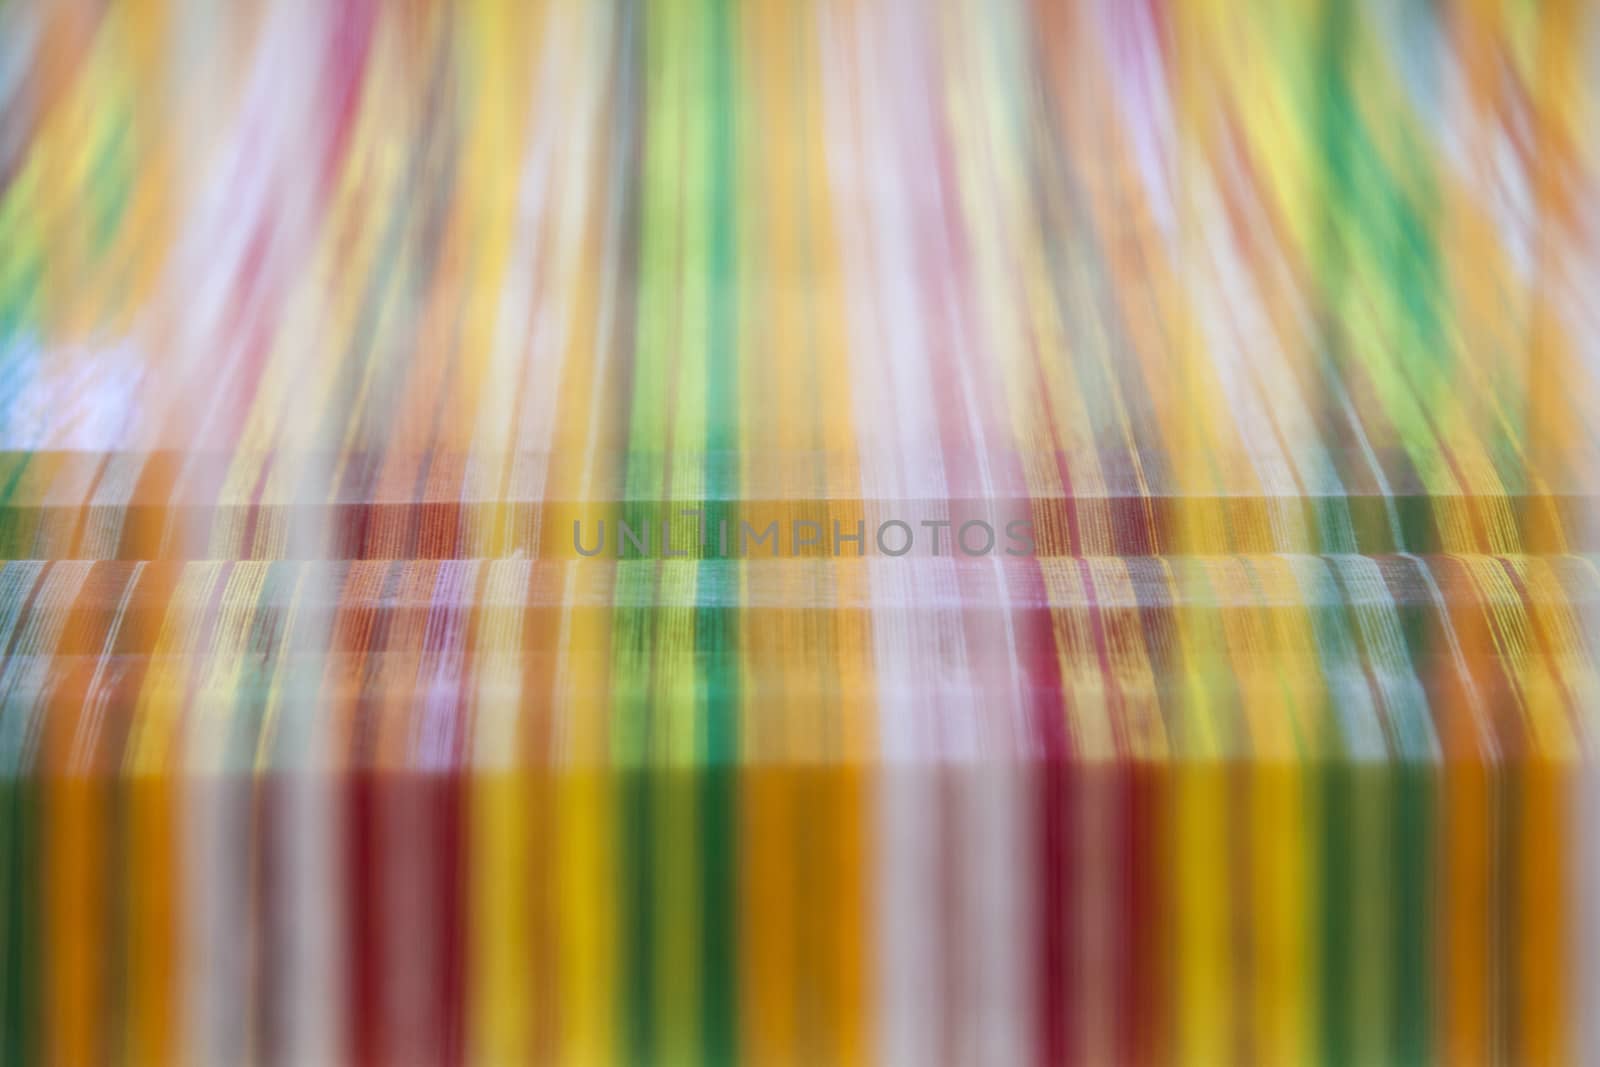 Yarn background, old weaving Loom and thread of yarn. A traditional hand-weaving loom being used to make cloth at home.Background surface blurred.(Background blur)